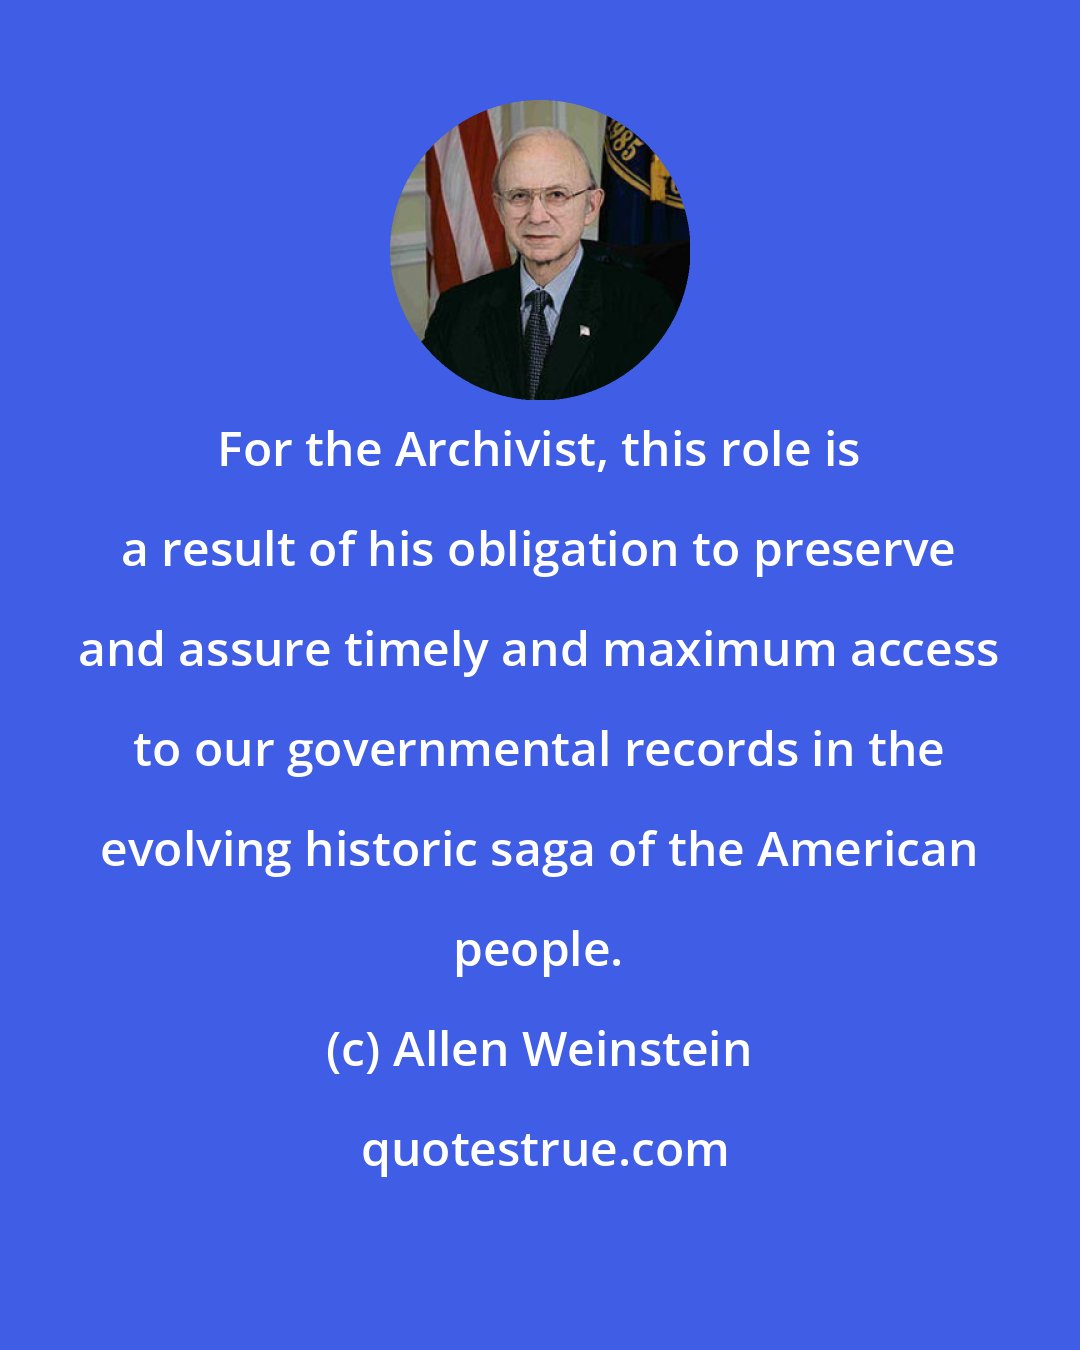 Allen Weinstein: For the Archivist, this role is a result of his obligation to preserve and assure timely and maximum access to our governmental records in the evolving historic saga of the American people.